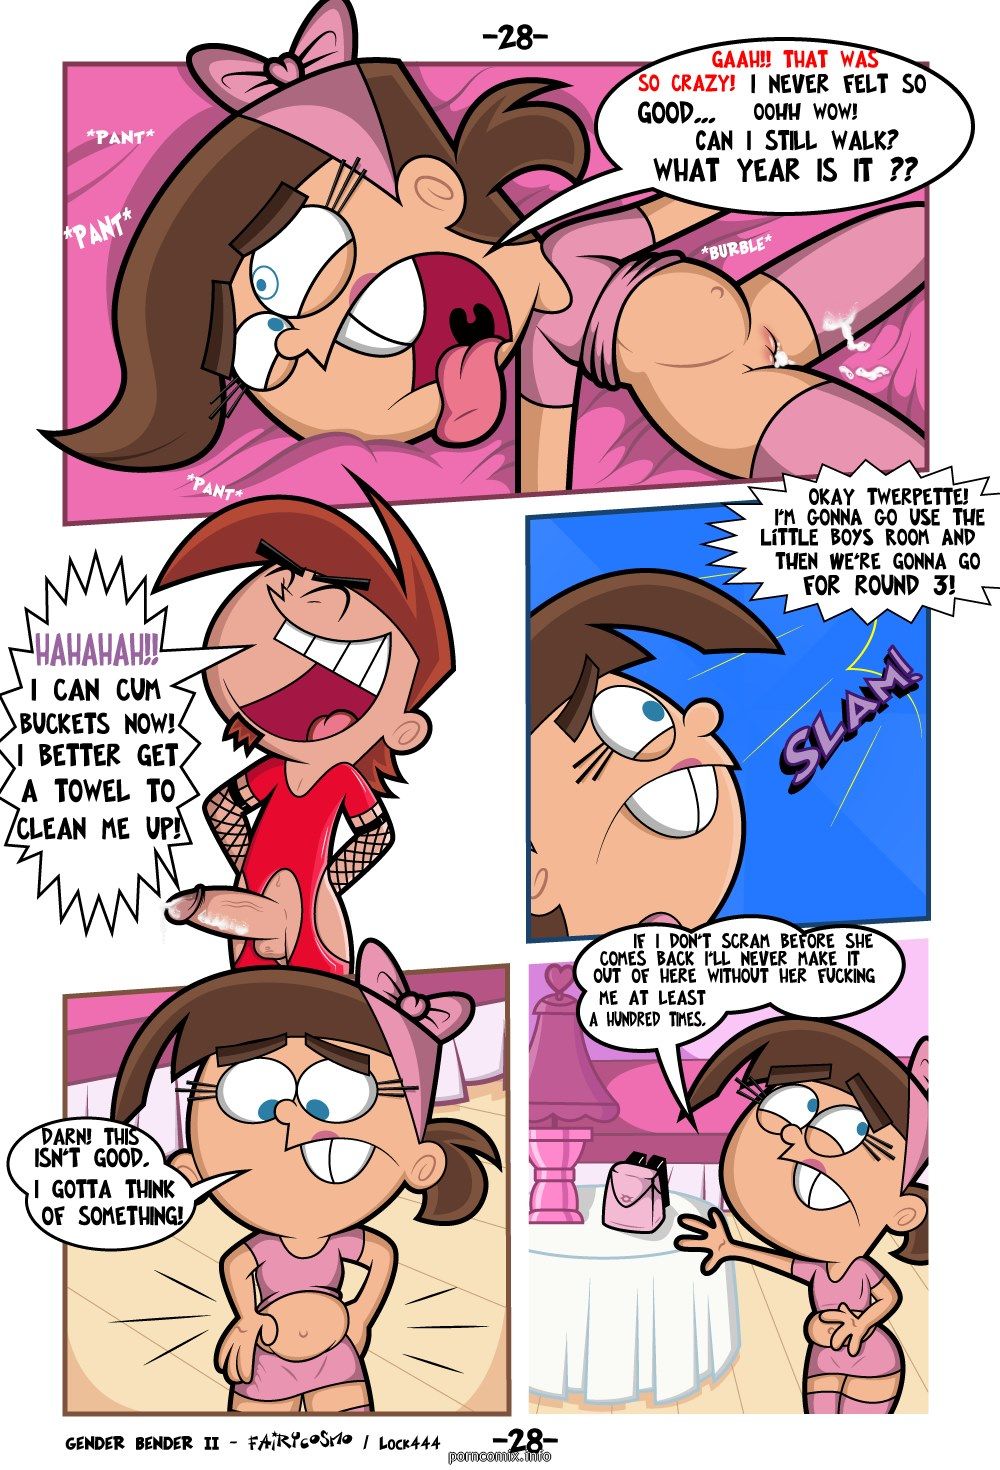 Fairly OddParents Gender Bender II [FairyCosmo] page 29